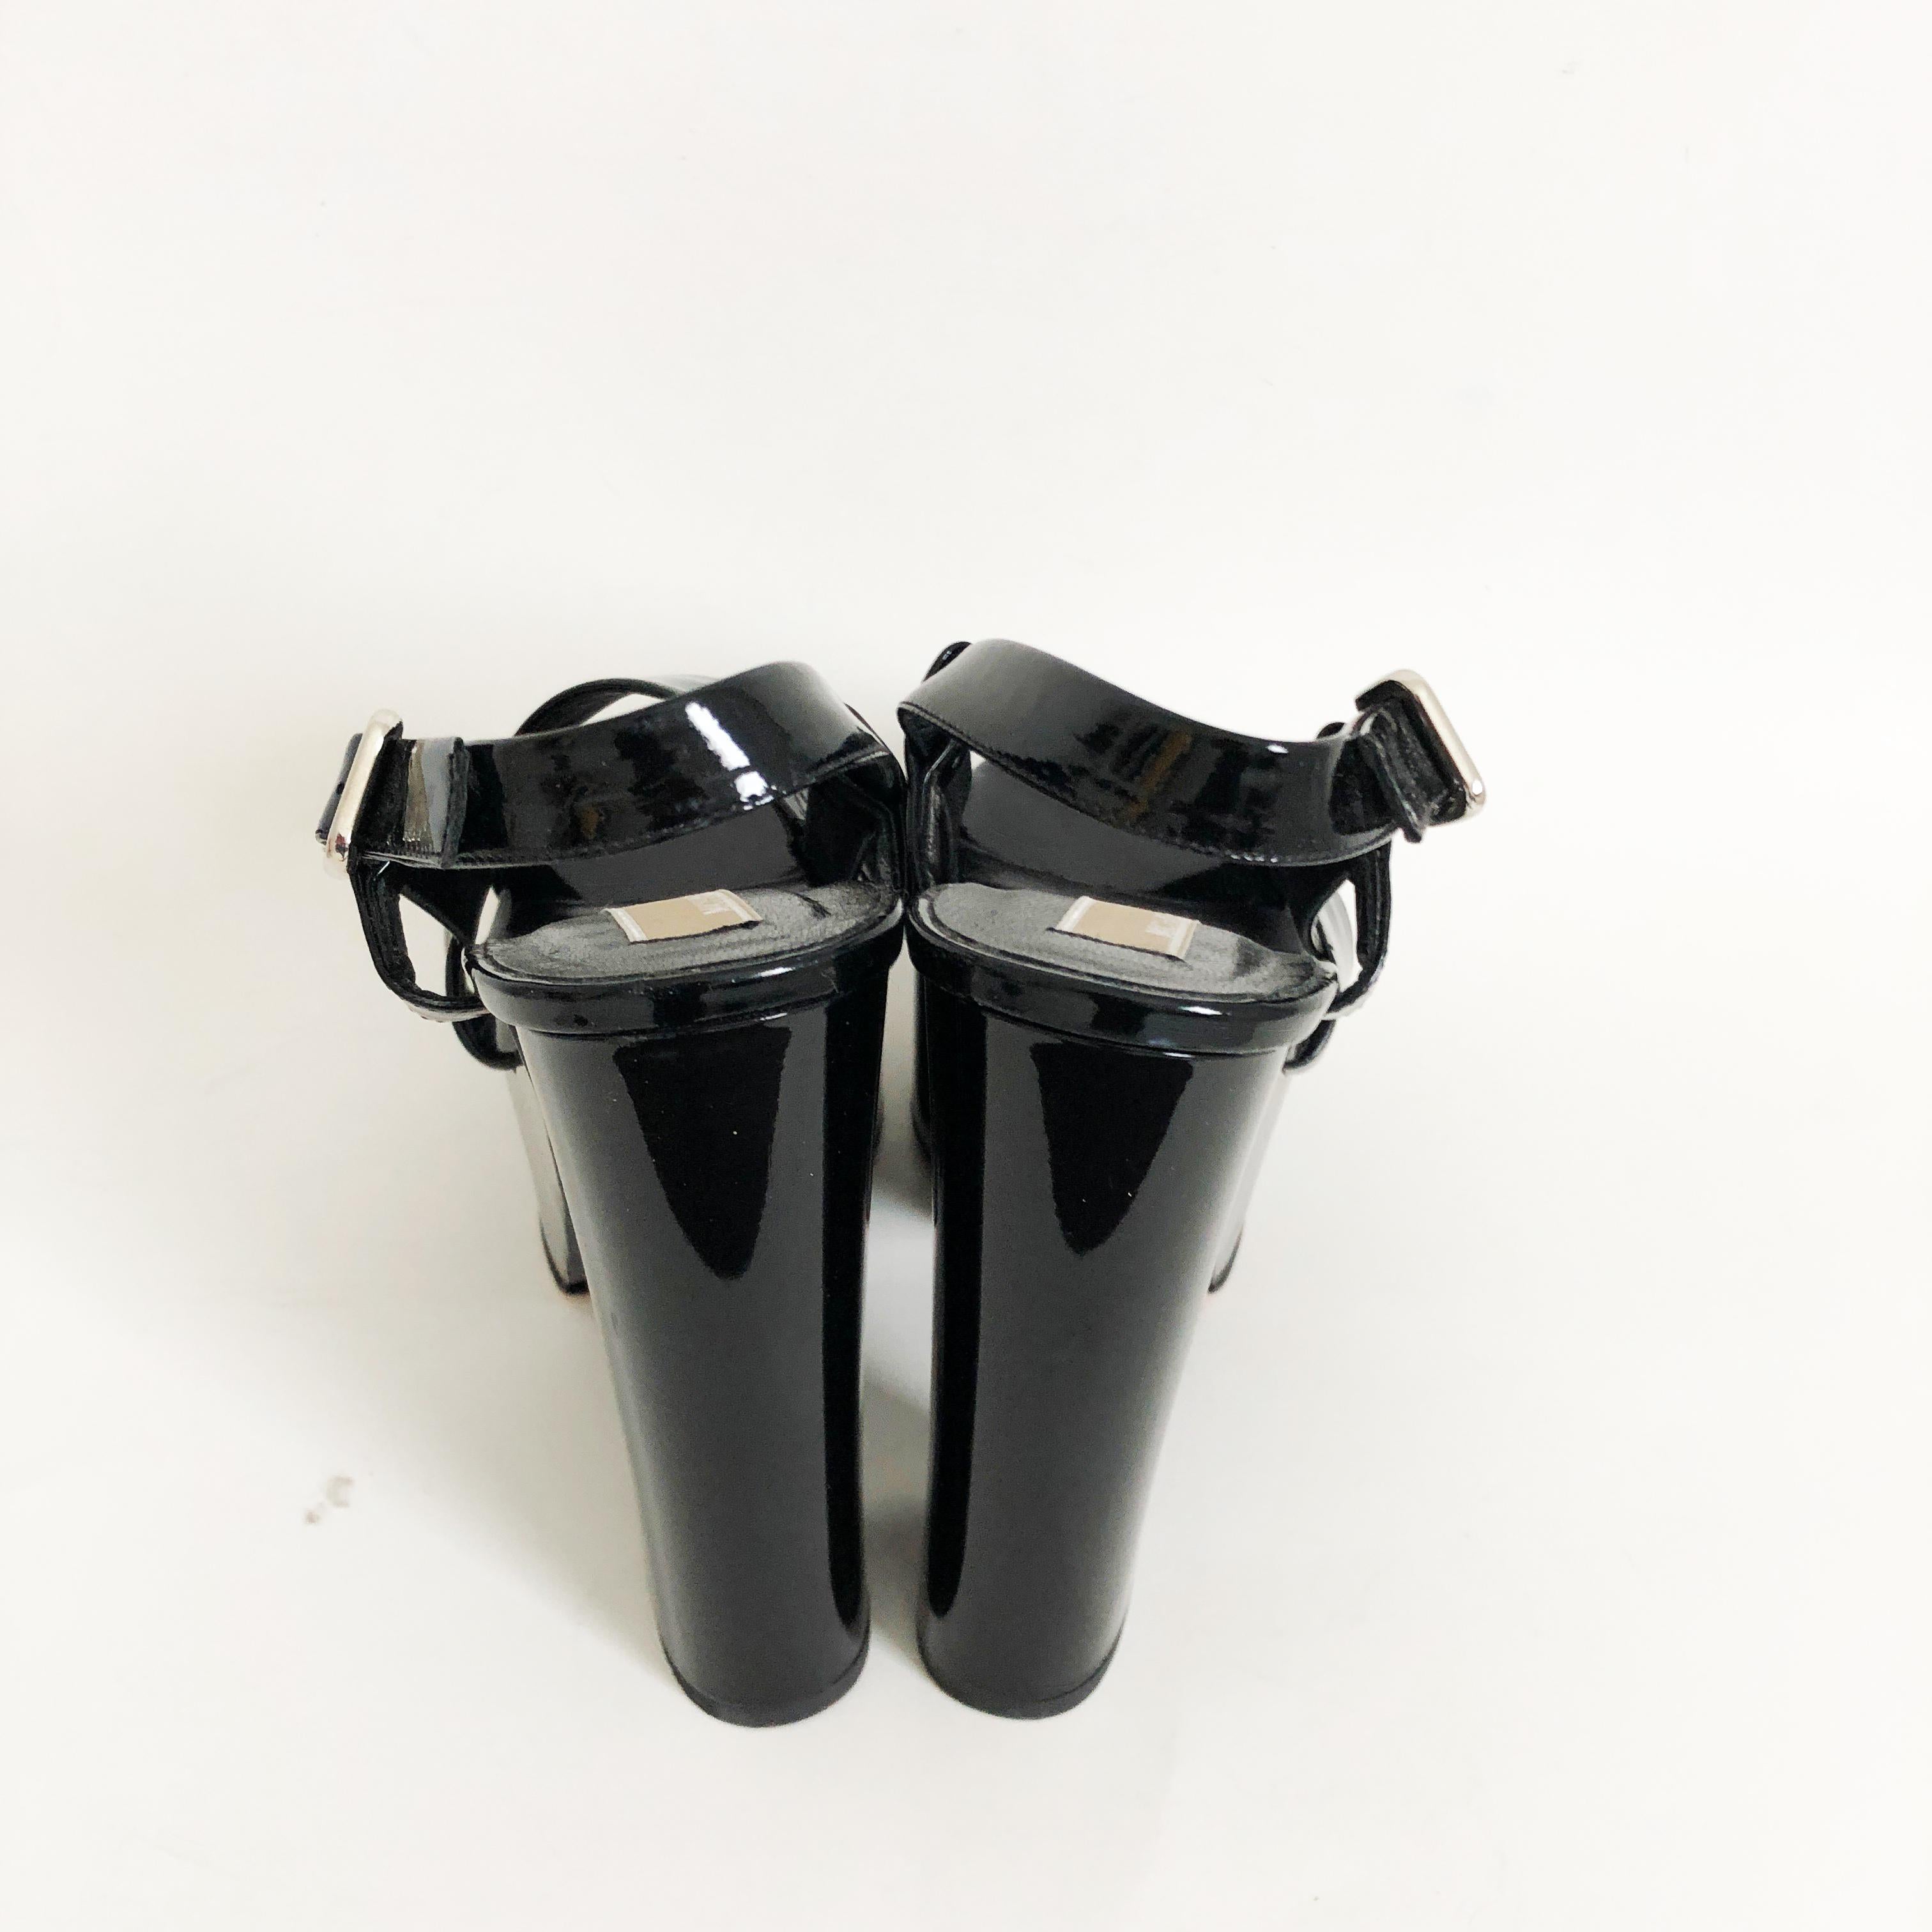 Michael Kors Black Patent Platforms Sandals Size 37.5 NOS NWOB In New Condition For Sale In Port Saint Lucie, FL